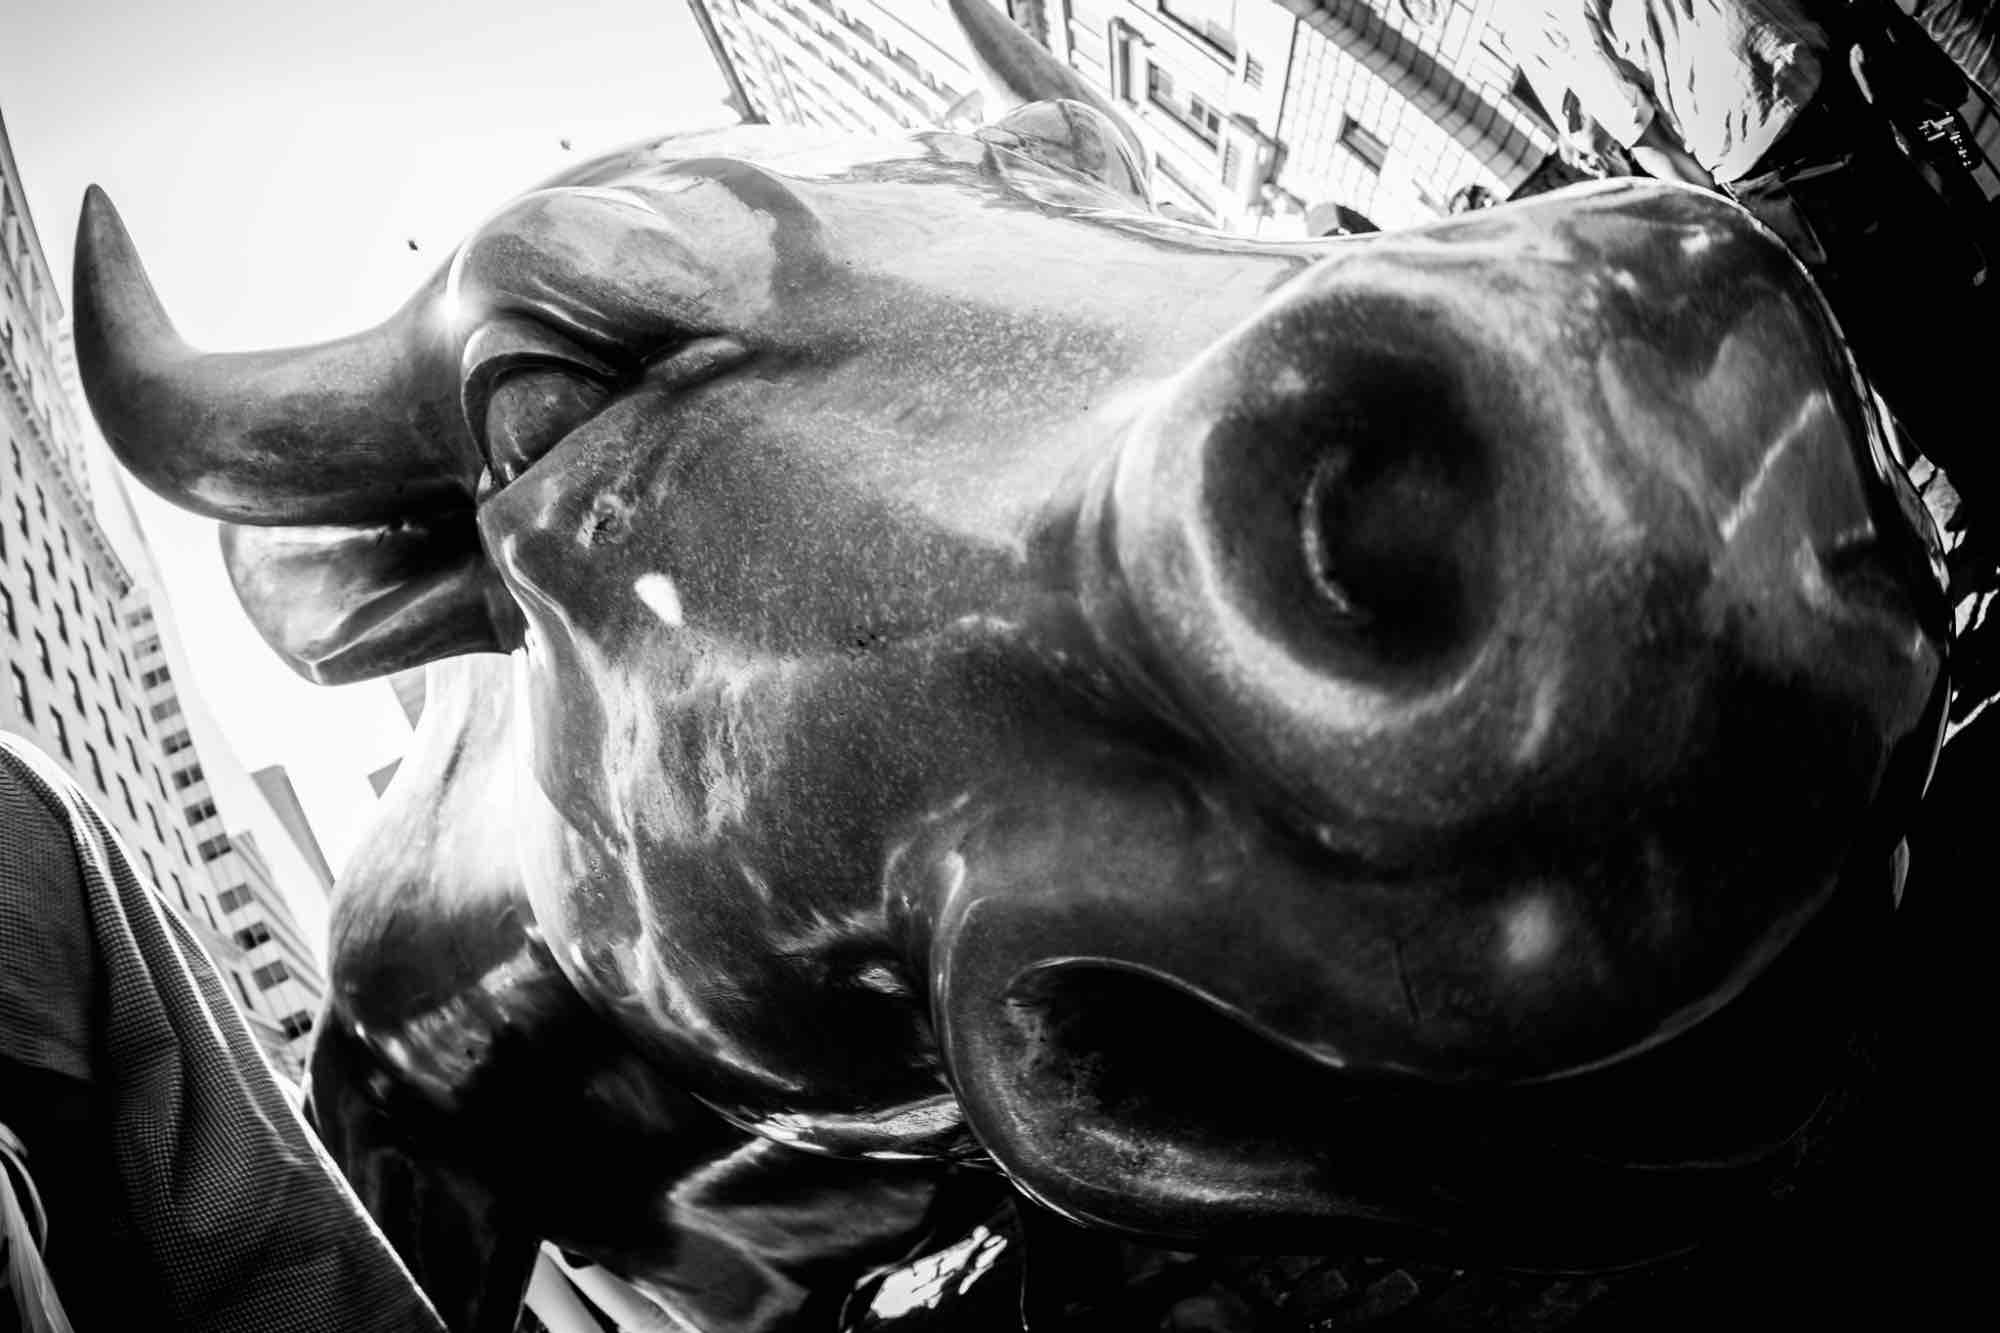 A close up of the Wall Street Bull in black and white.